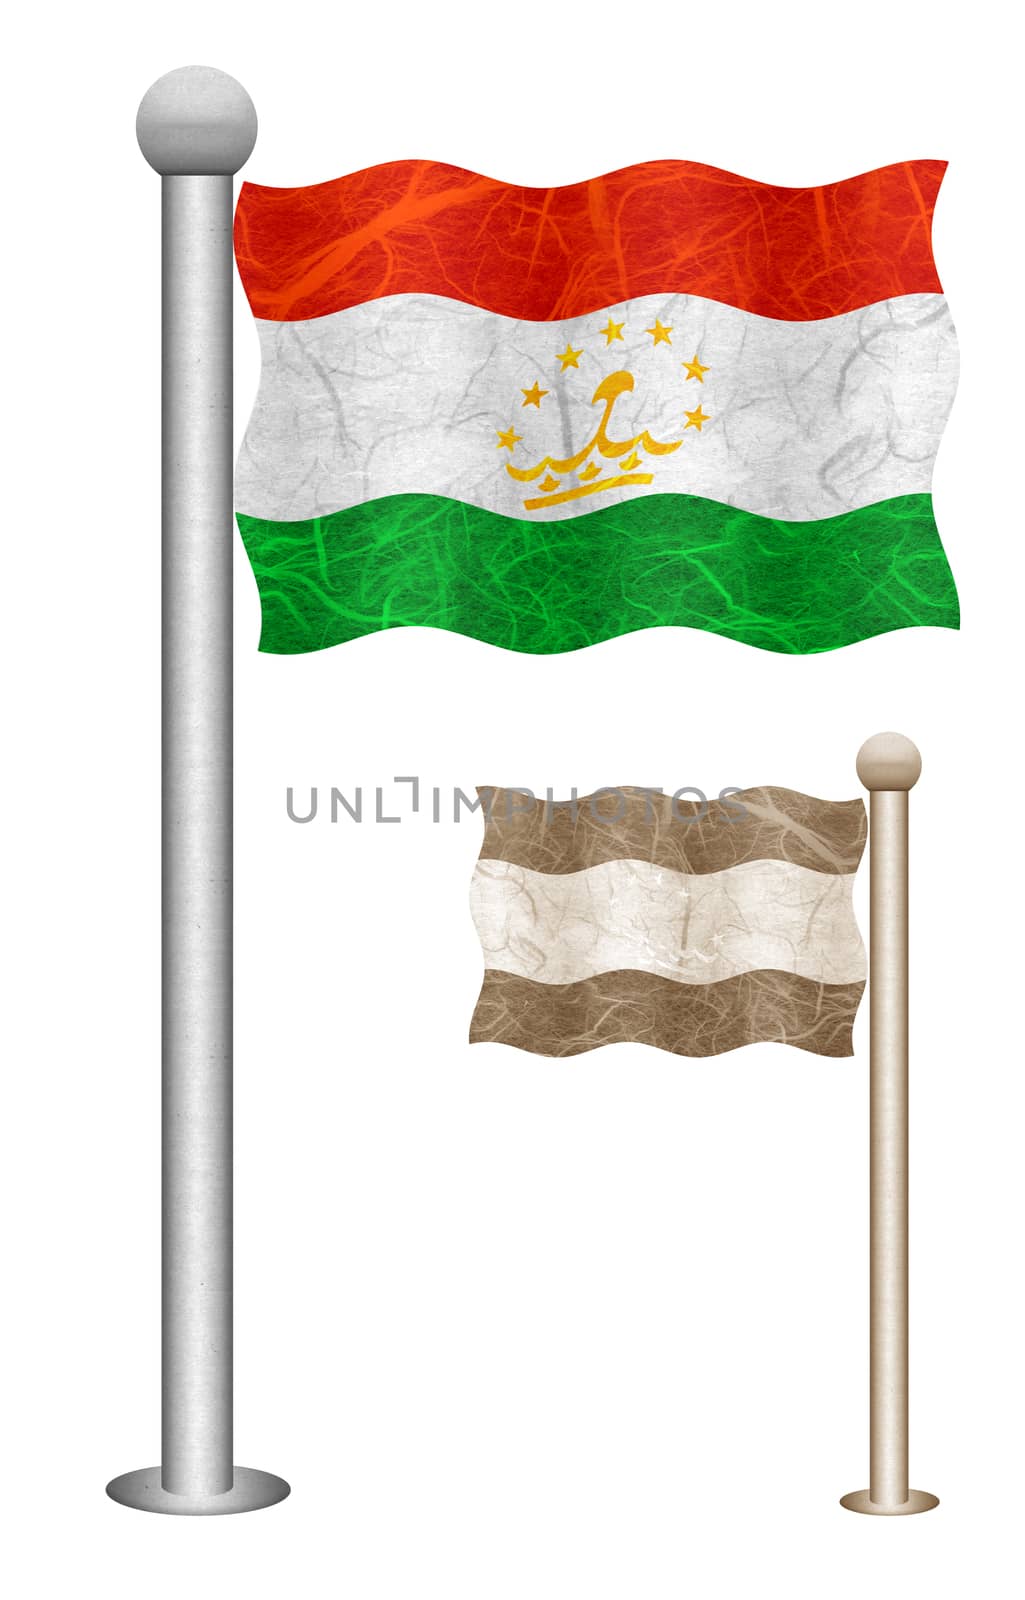 Tajikistan flag waving on the wind. Flags of countries in Asia. Mulberry paper on white background.